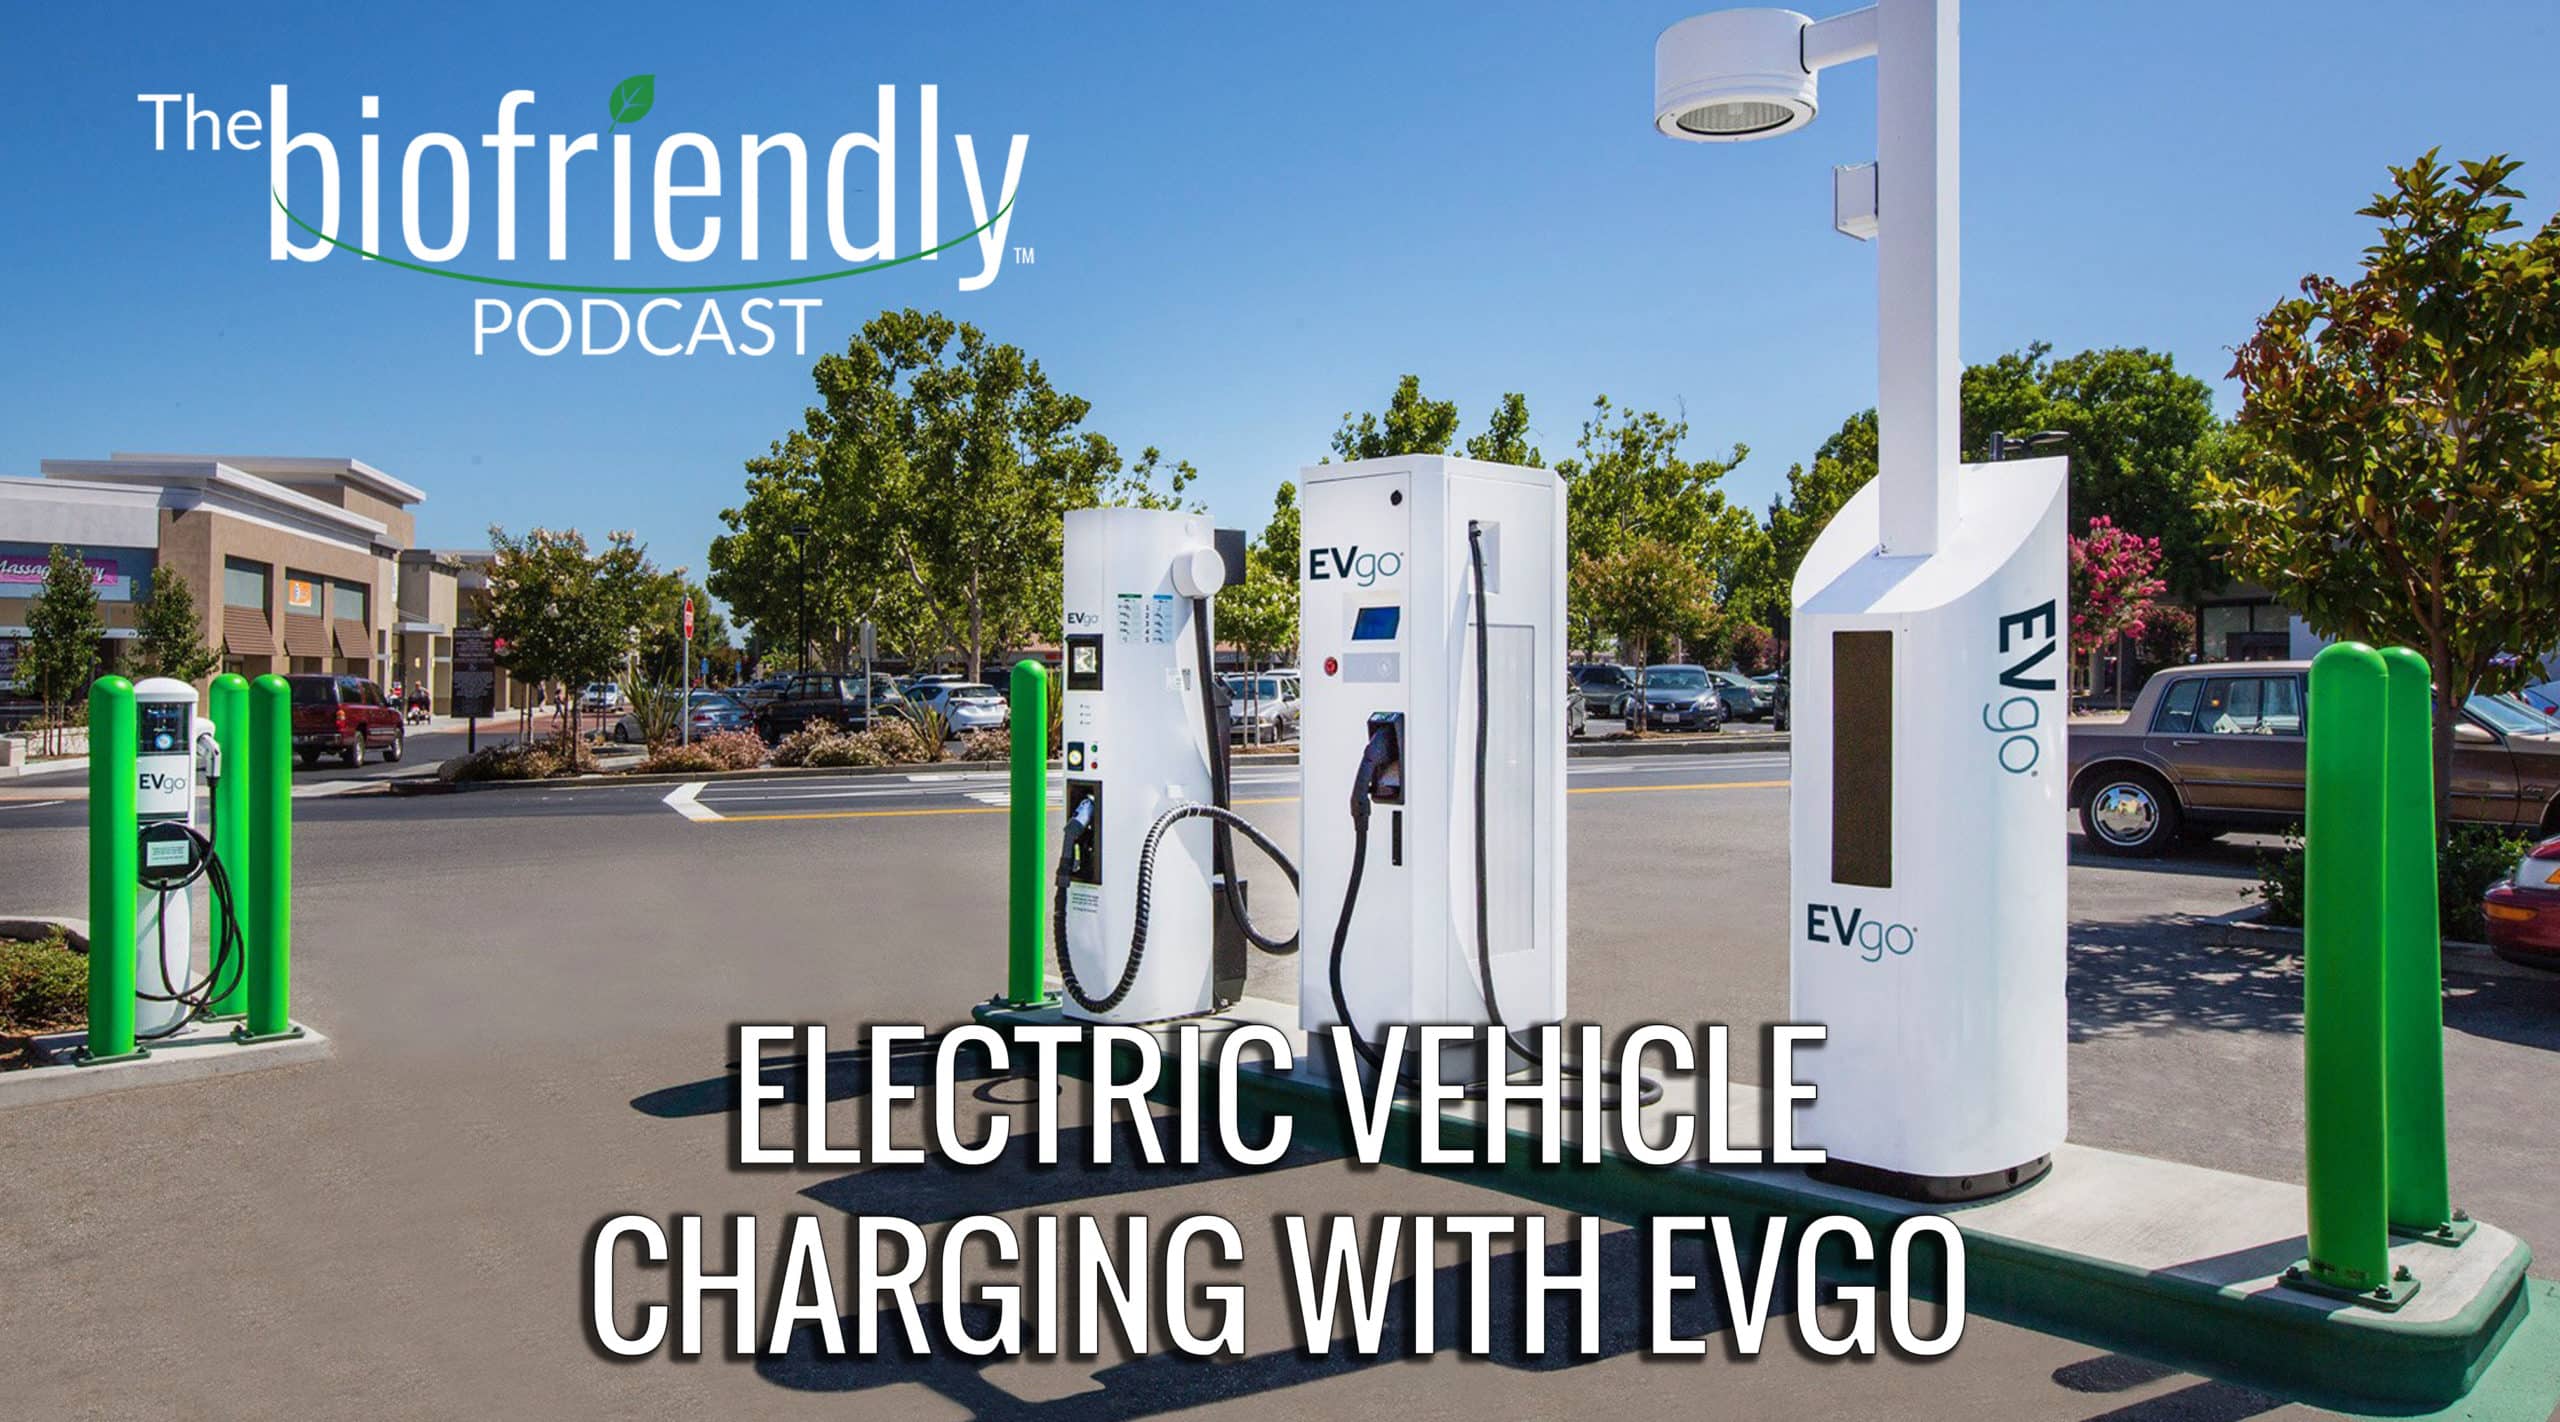 The Biofriendly Podcast - Episode 64 - Electric Vehicle Charging with EVgo